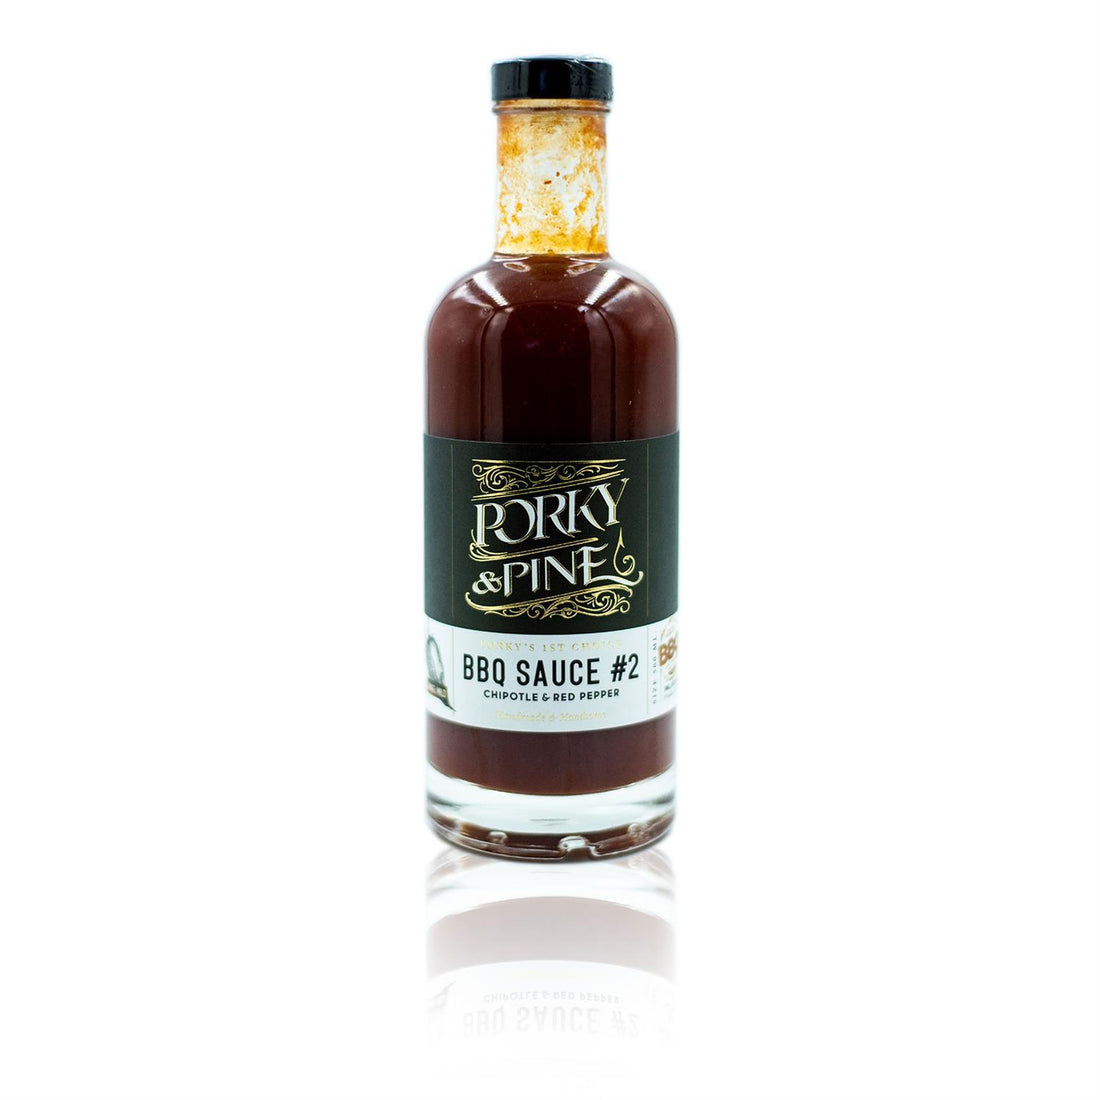 Porky&Pine BBQ Sauce – #2 Chipotle & Red Pepper